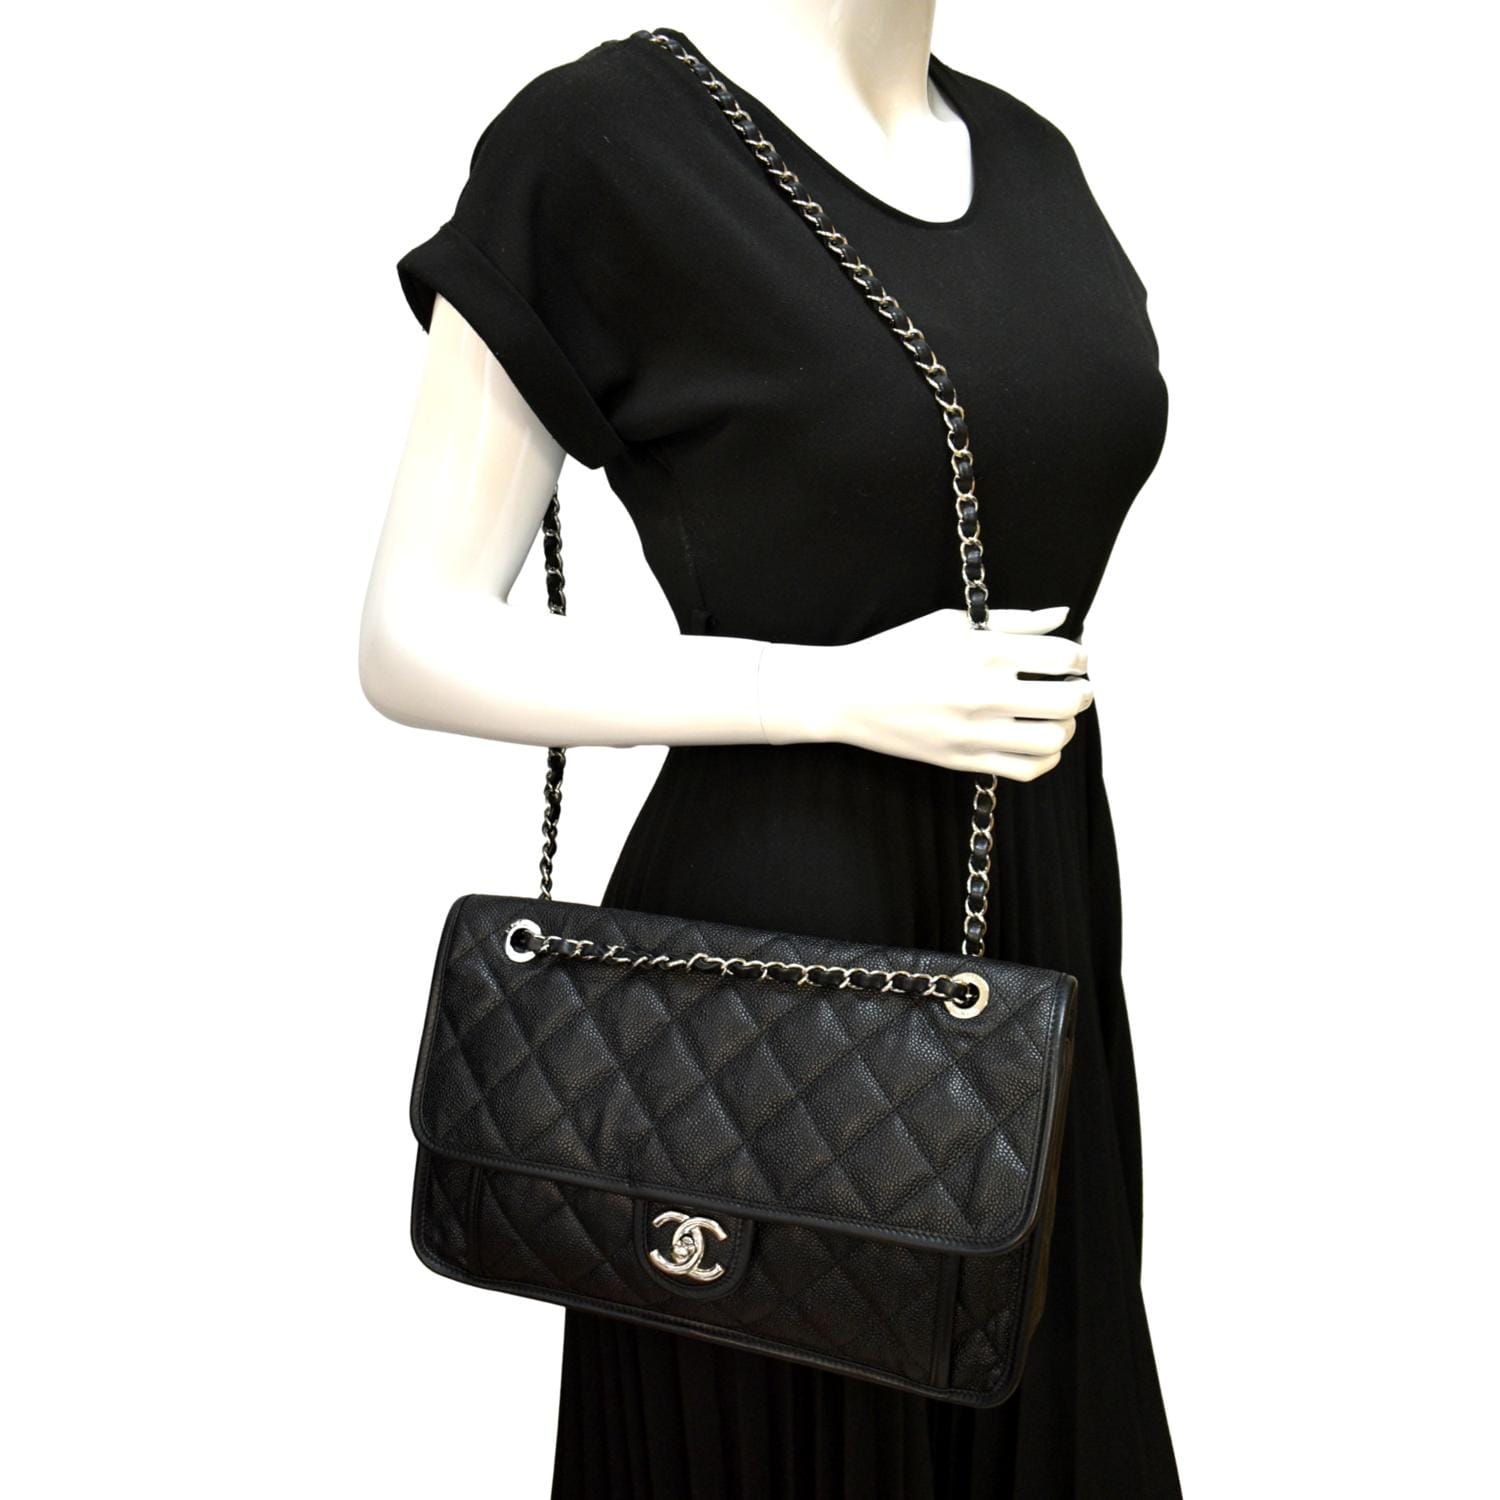 CHANEL Riviera Flap Large Quilted Caviar Leather Bag